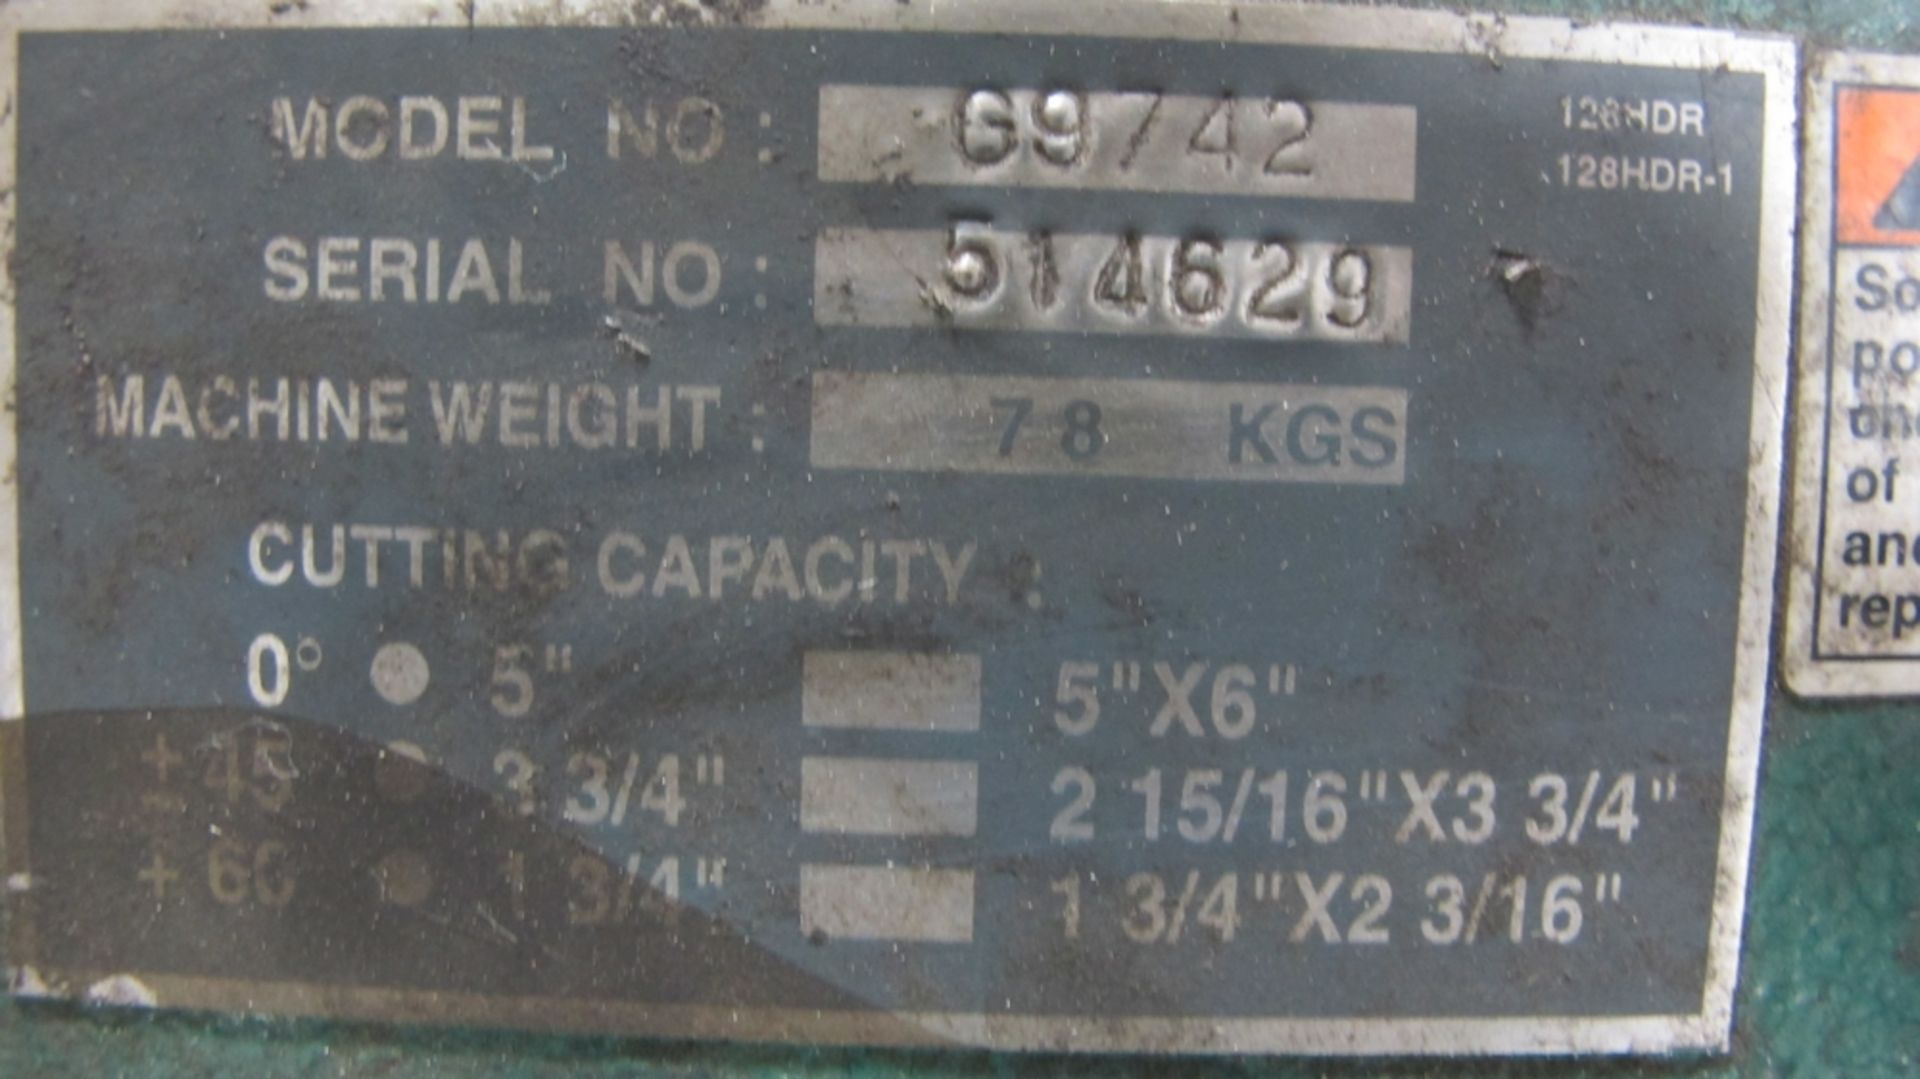 LOT OF GRIZZLY, MODEL 69742, HORIZONTAL BANDSAW, S/N 514629 (100 SHIRLEY AVE KITCHENER) - Image 4 of 4